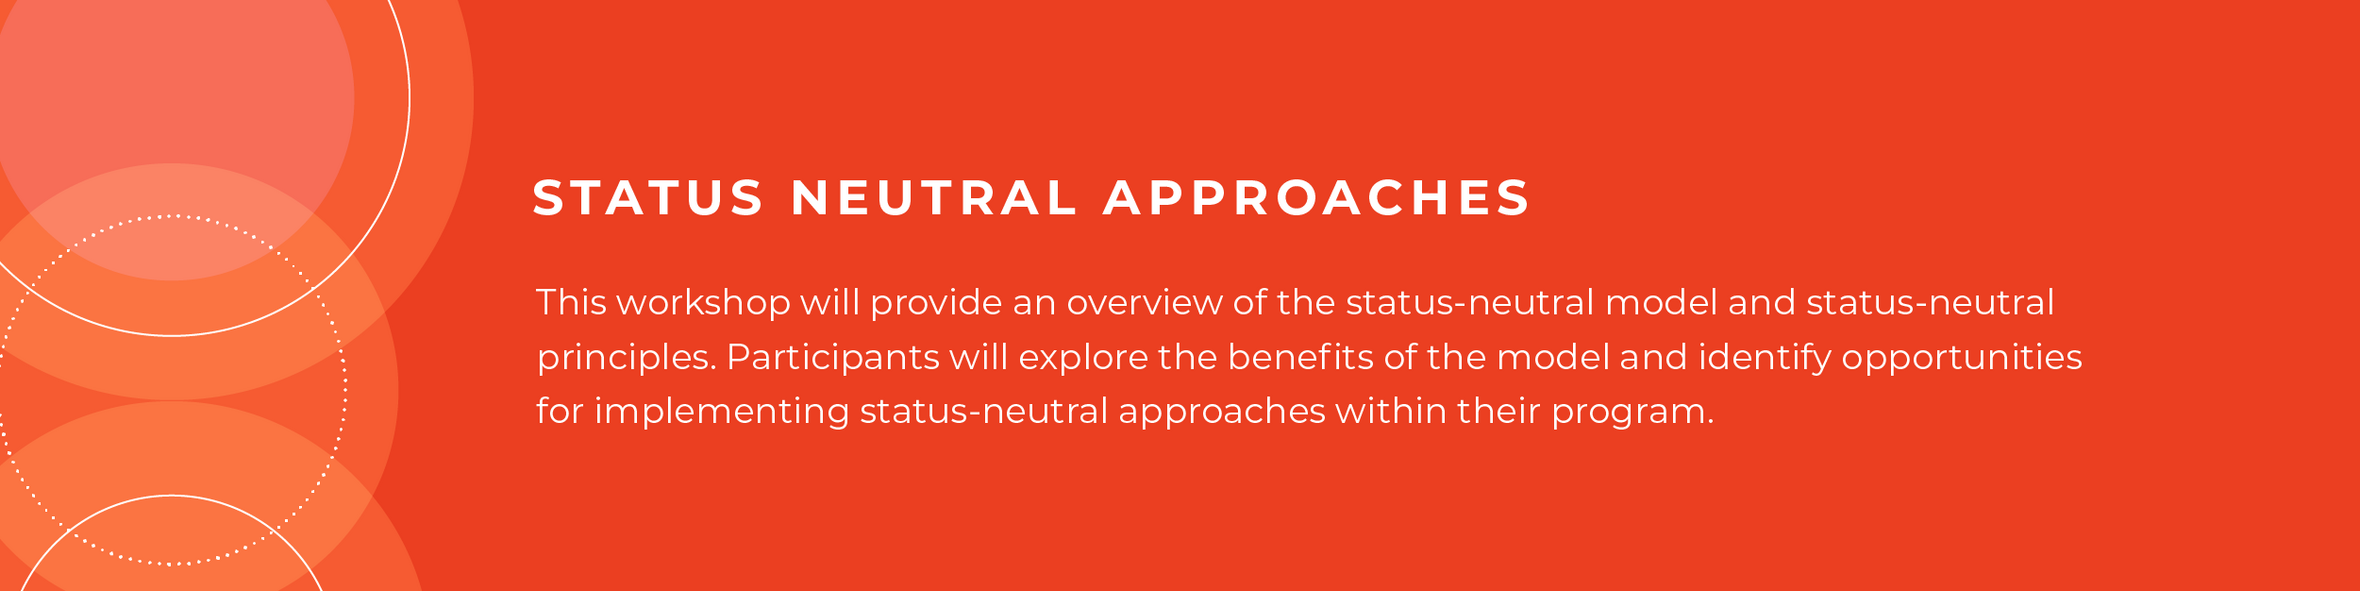 Status Neutral Approaches